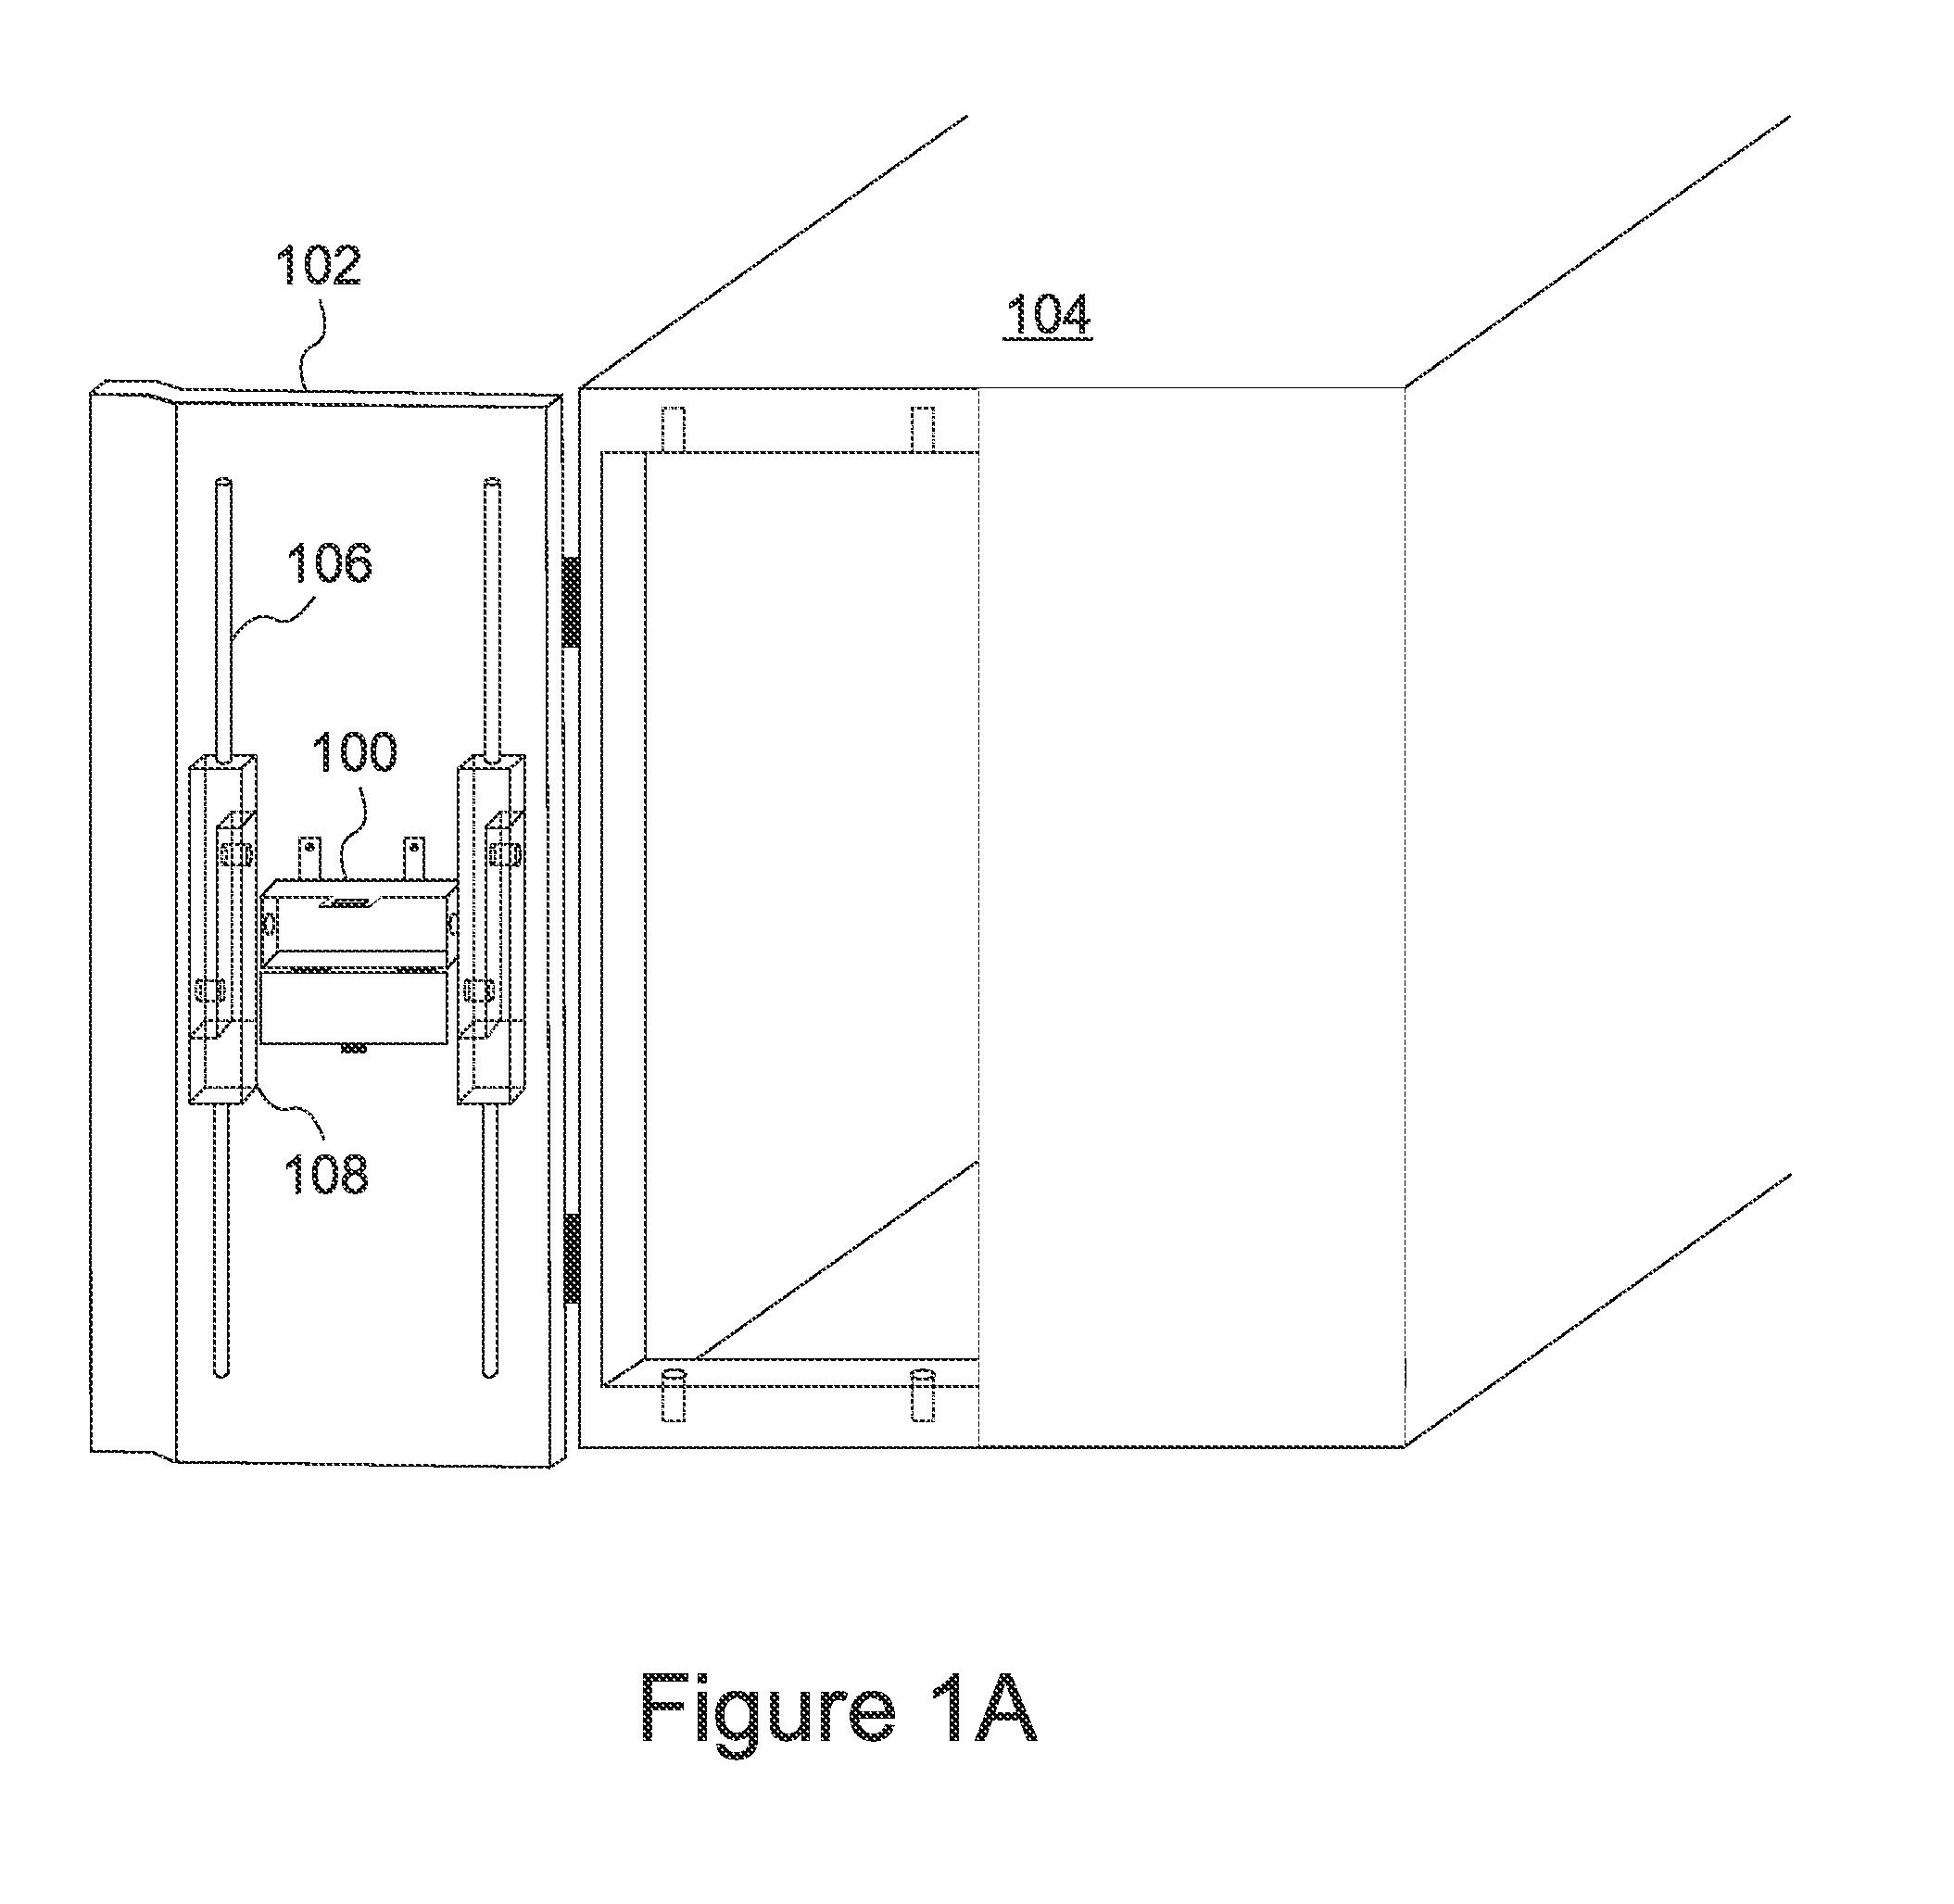 System and method for secure shipment of high-value cargo